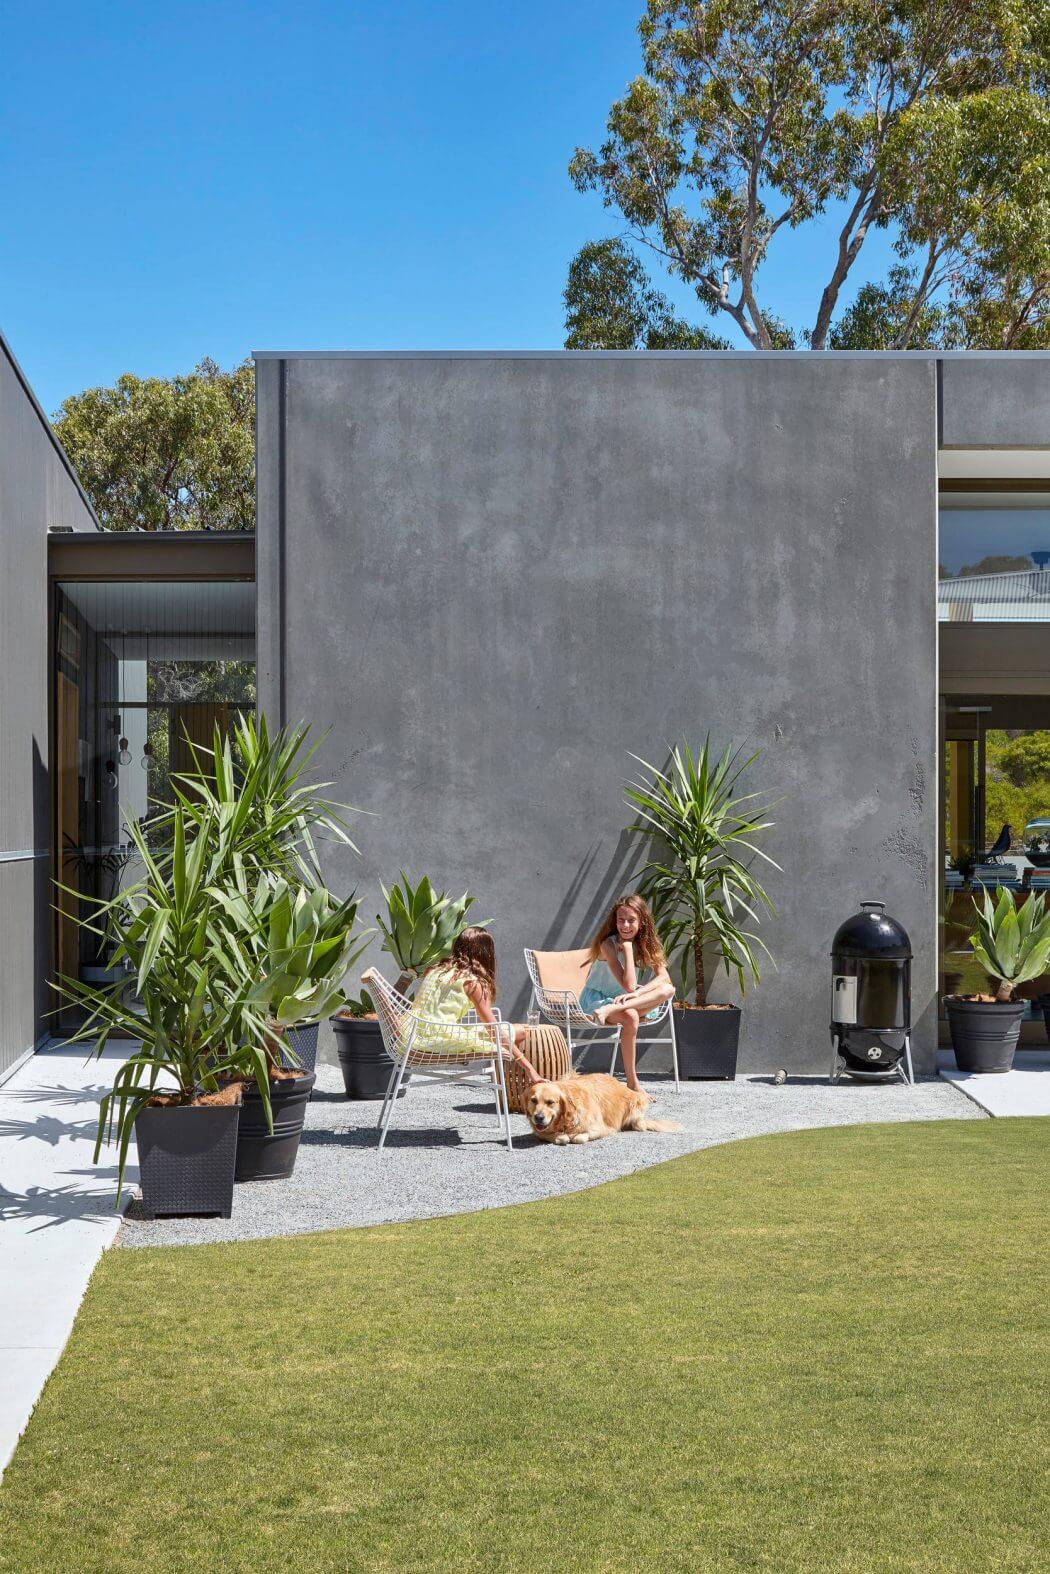 Modern concrete exterior with lush greenery, comfortable seating, and a dog, creating a relaxing outdoor oasis.